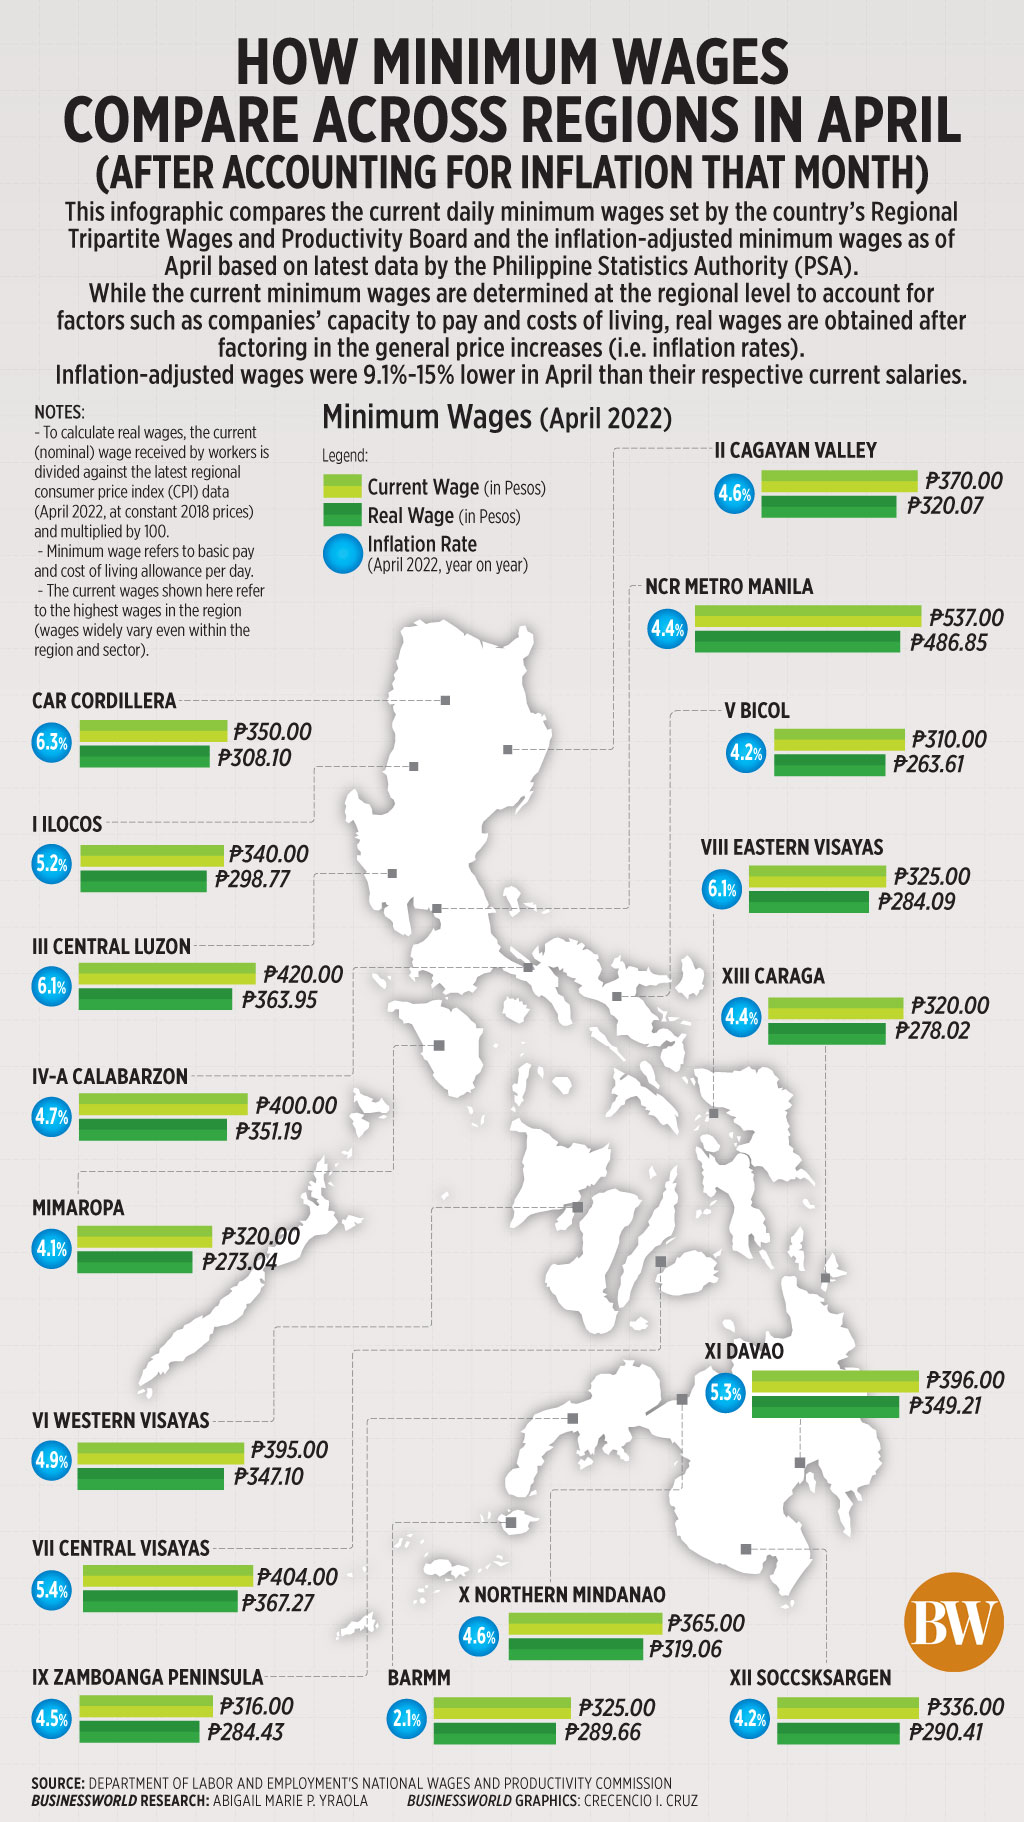 How minimum wages compare across regions in April